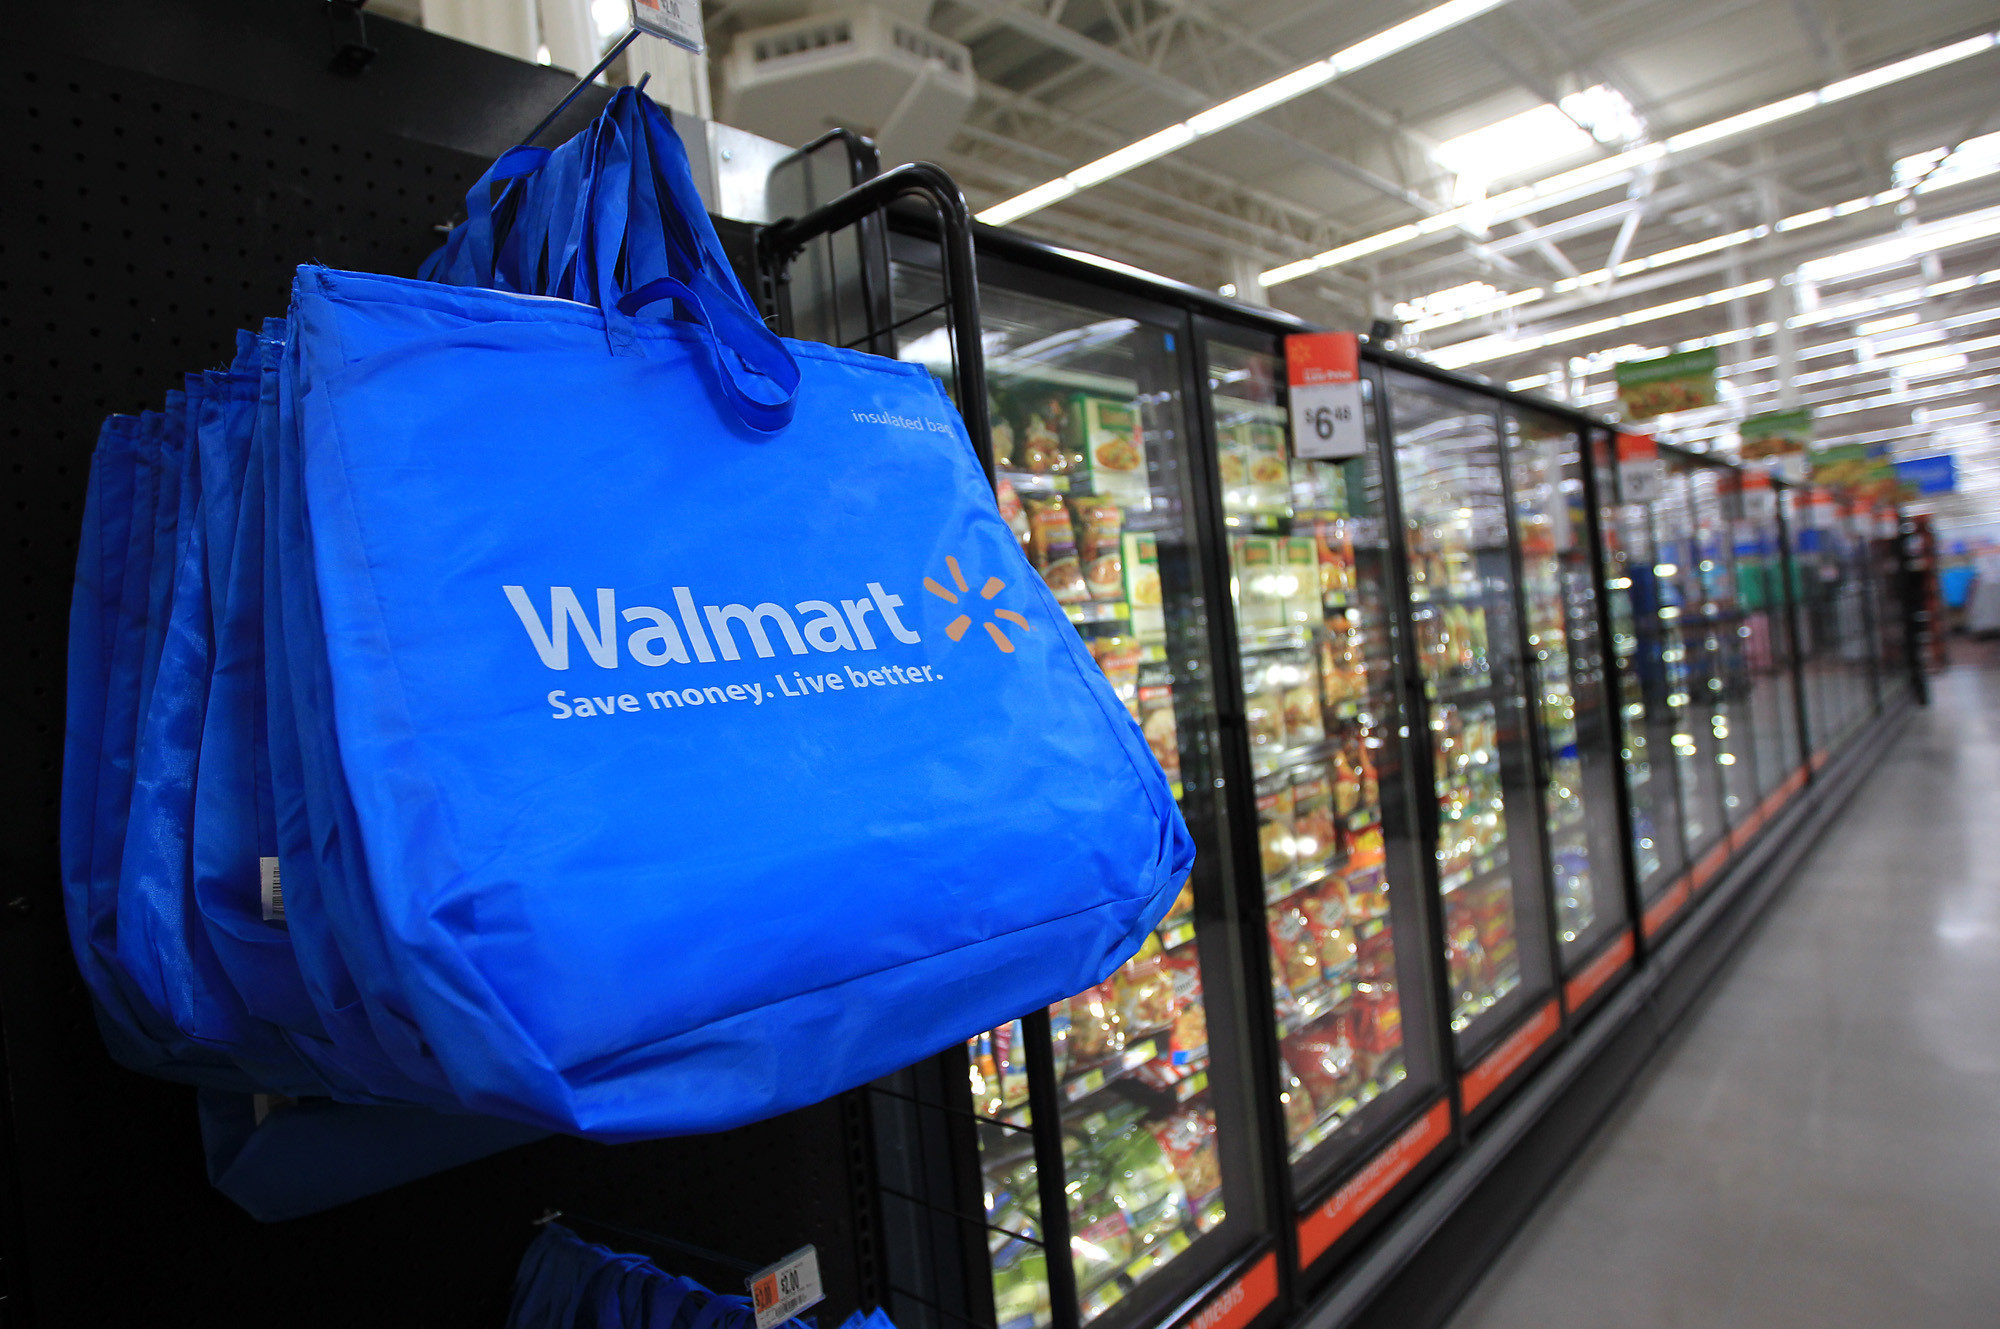 collection of news and information related to Wal-Mart Stores, Inc ...